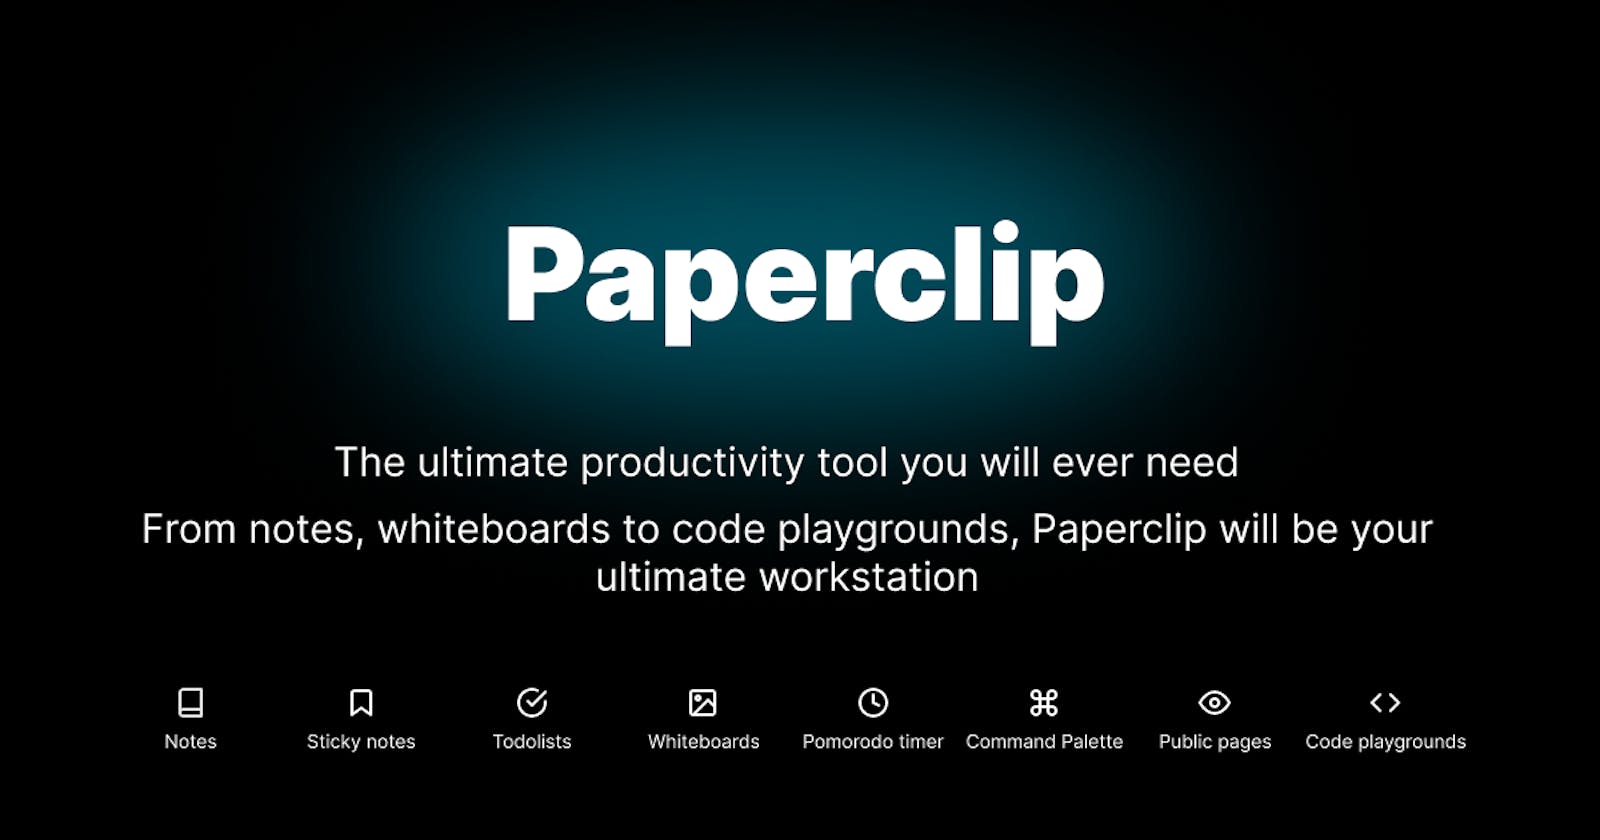 How I built Paperclip  - The ultimate productivity tool you will ever need.